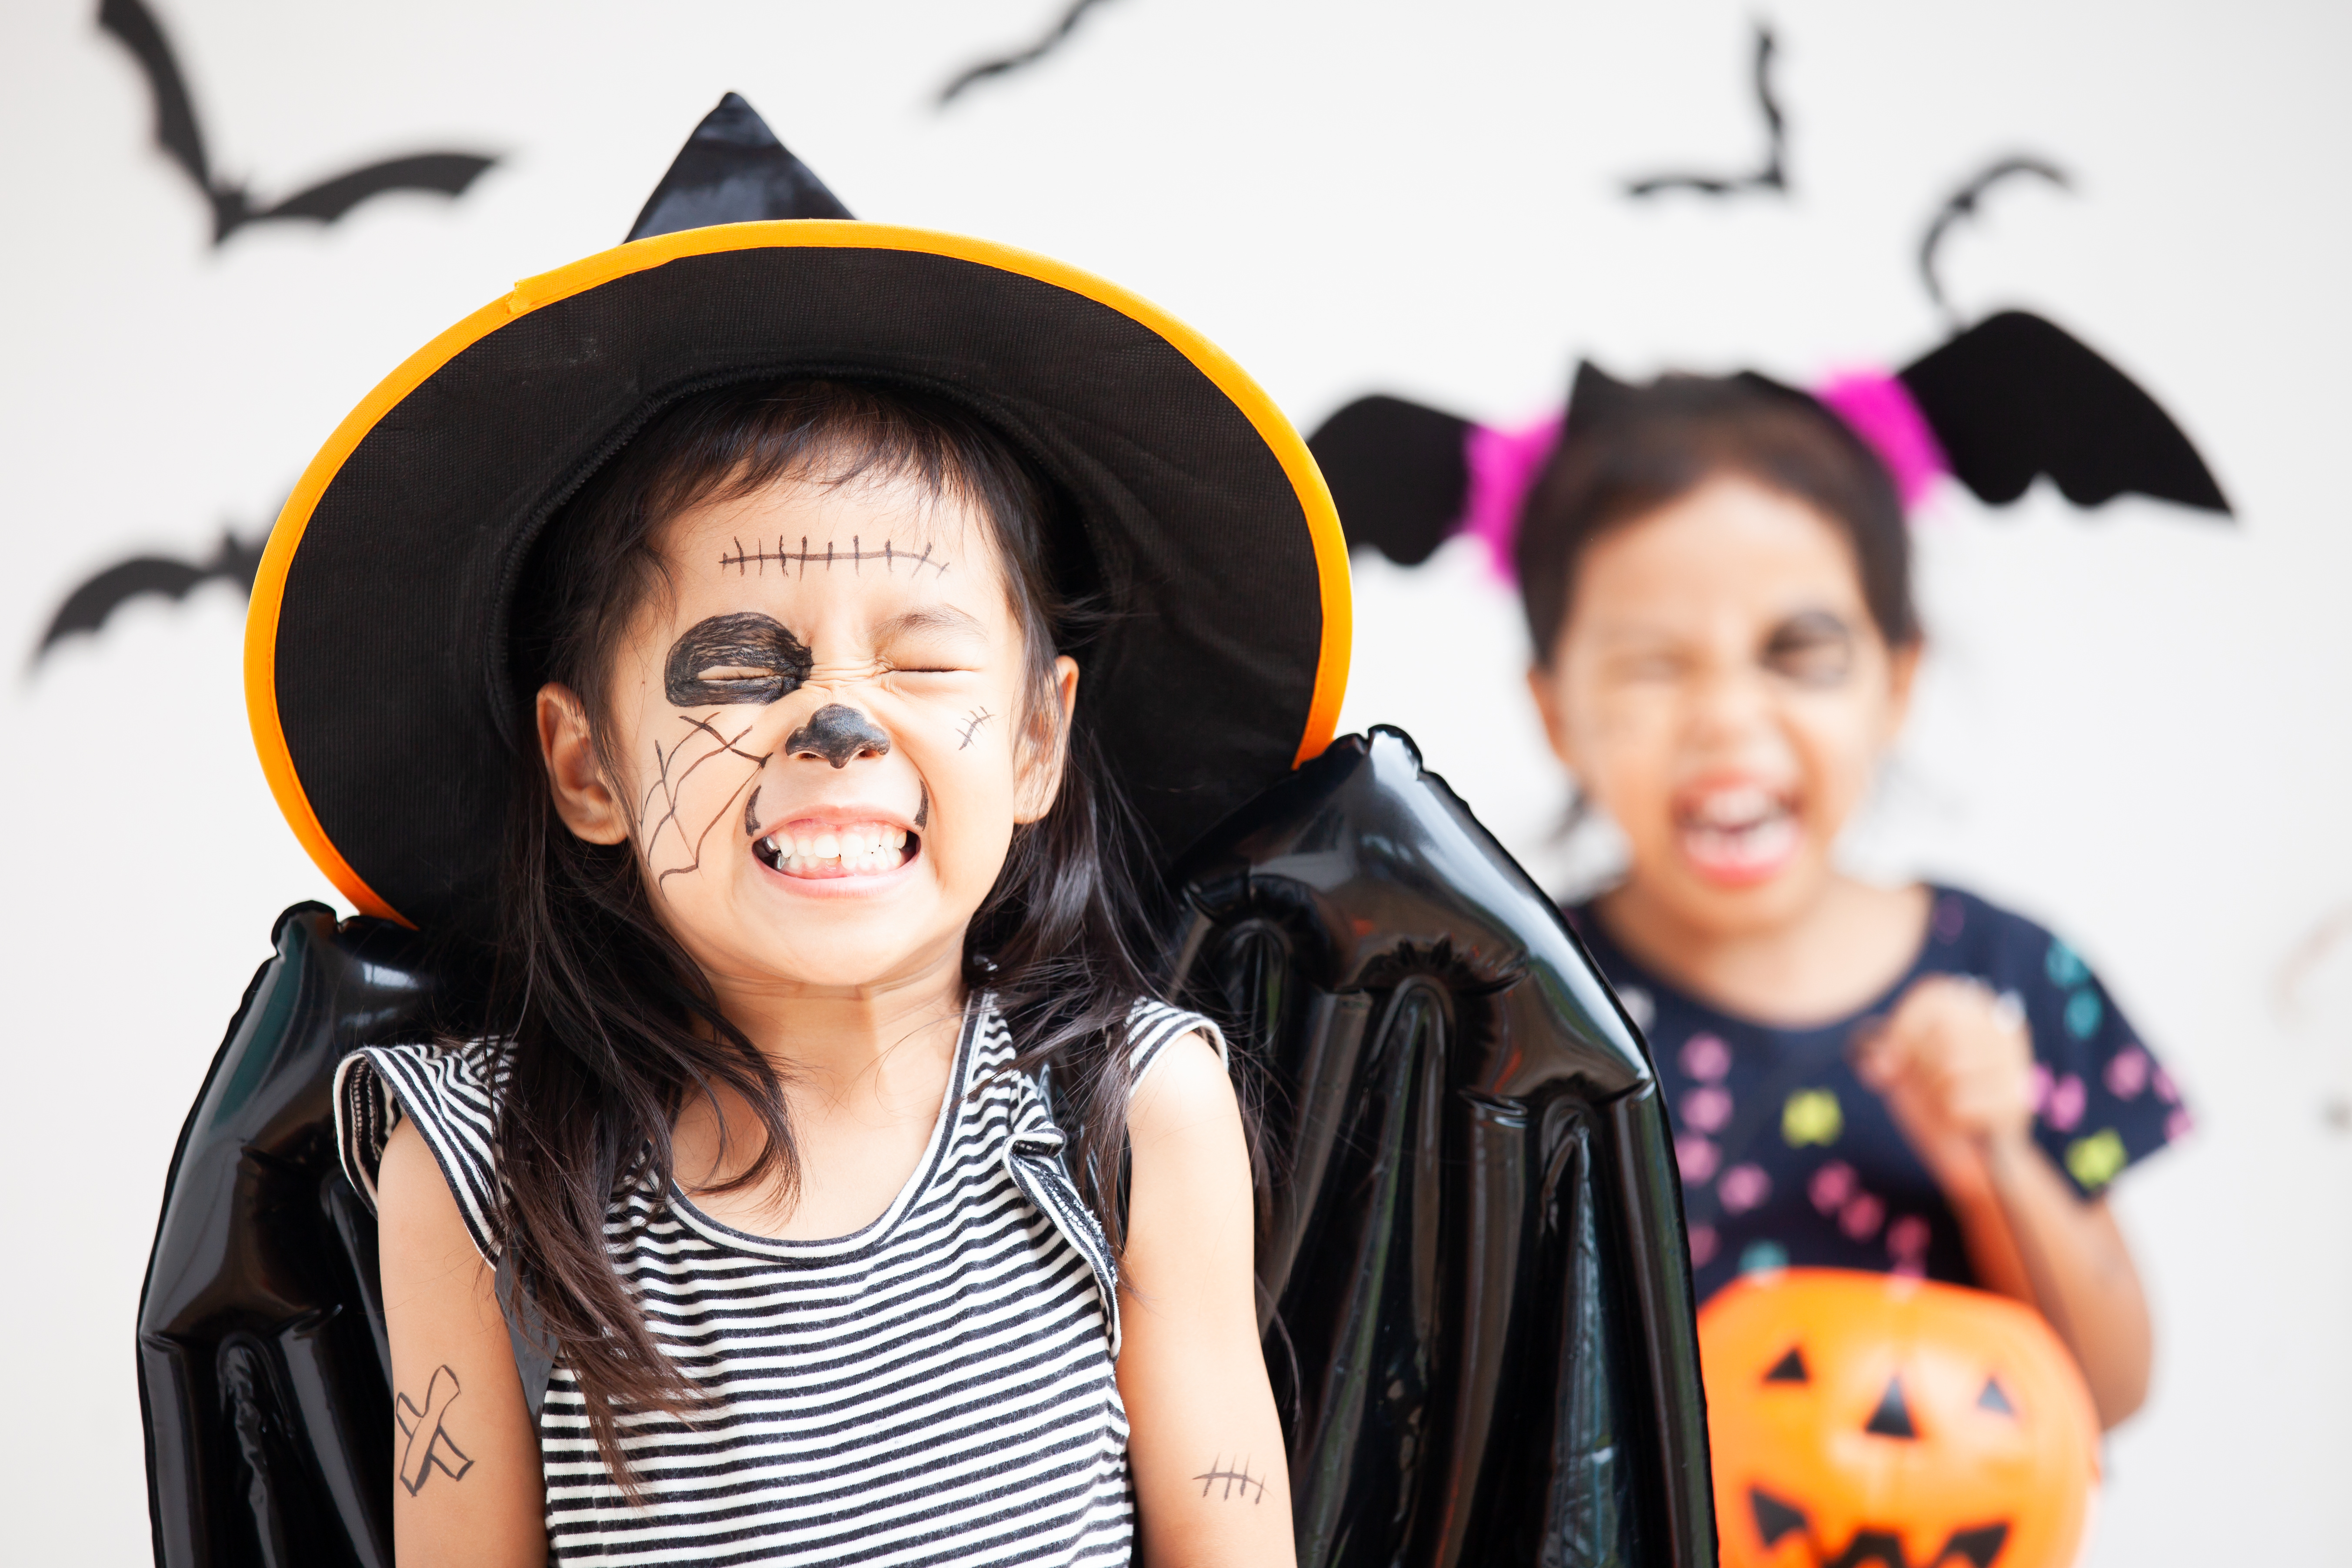 3 Reasons Why Halloween Is Great for Kids